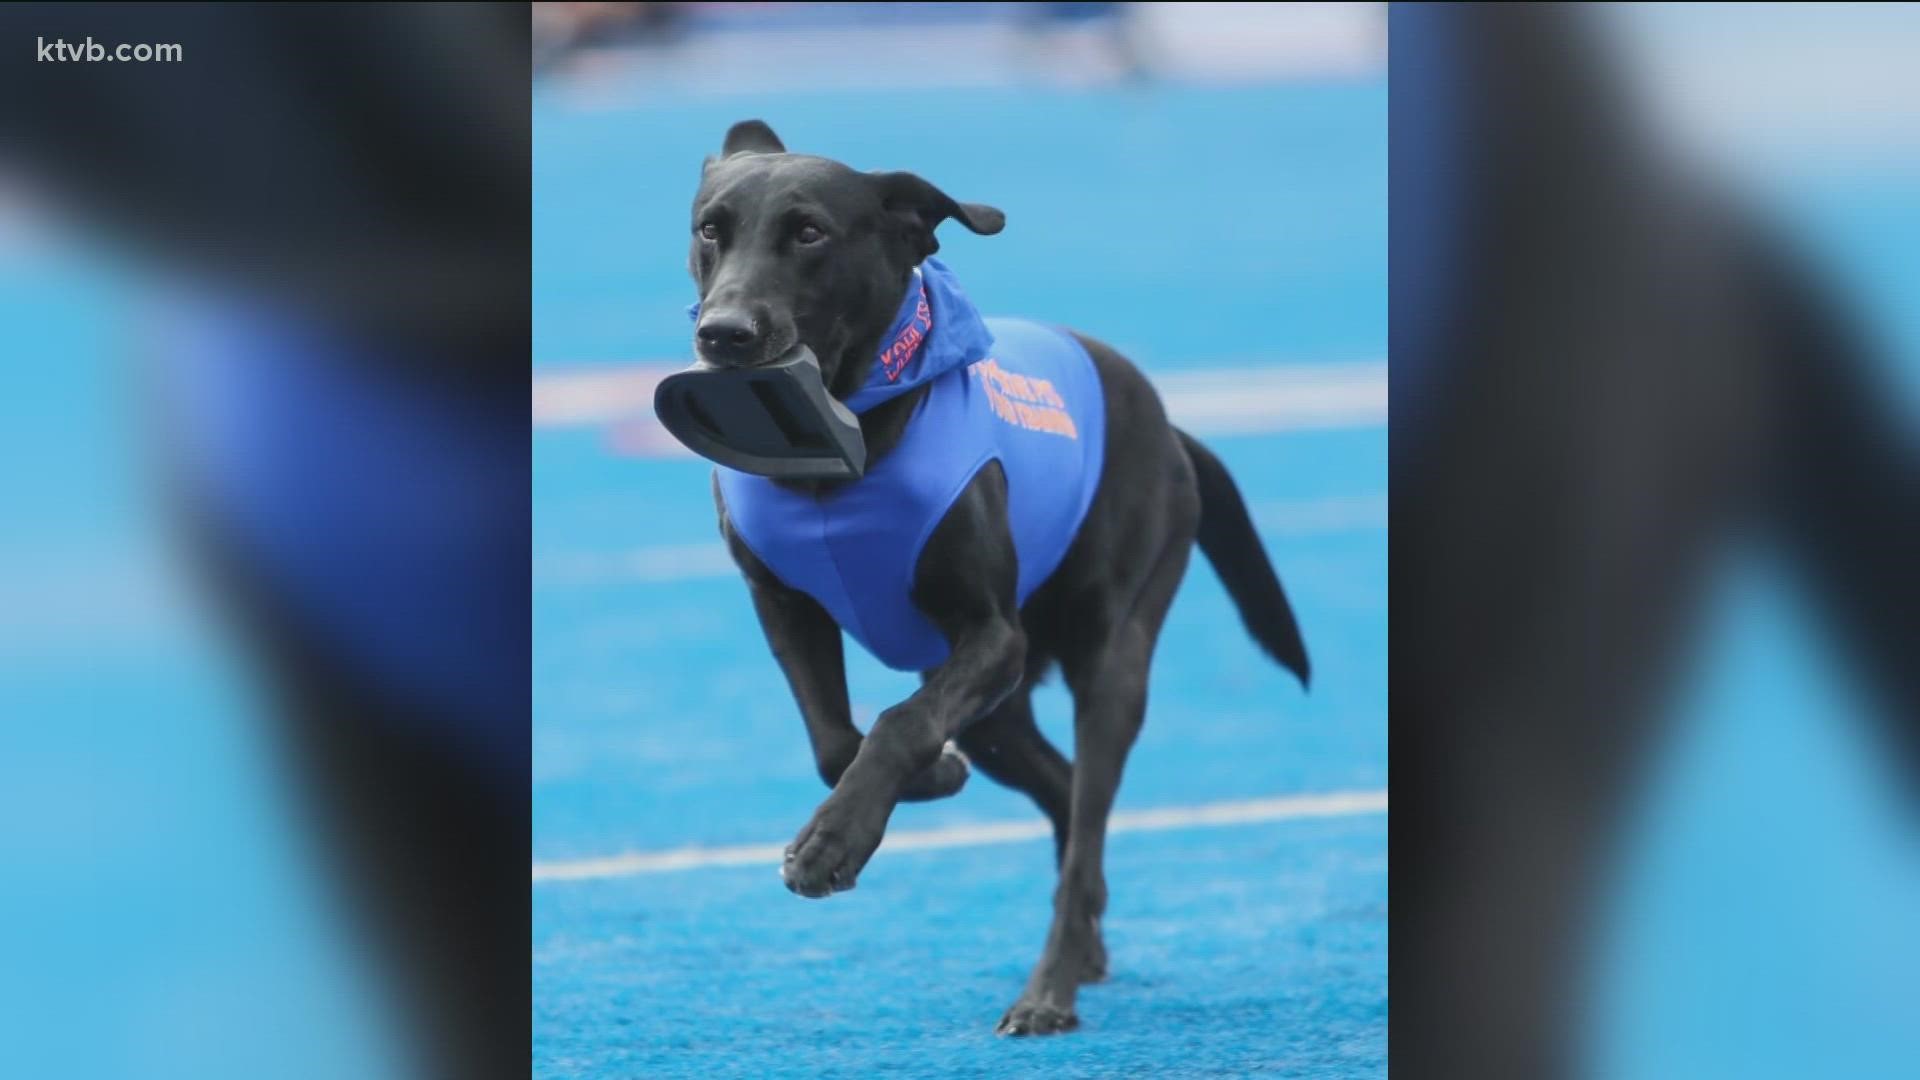 Before his sudden death, Kohl was set to pass the torch of official dog tee duties to his son, Blitz, during Boise State's home opener on Sept. 10.